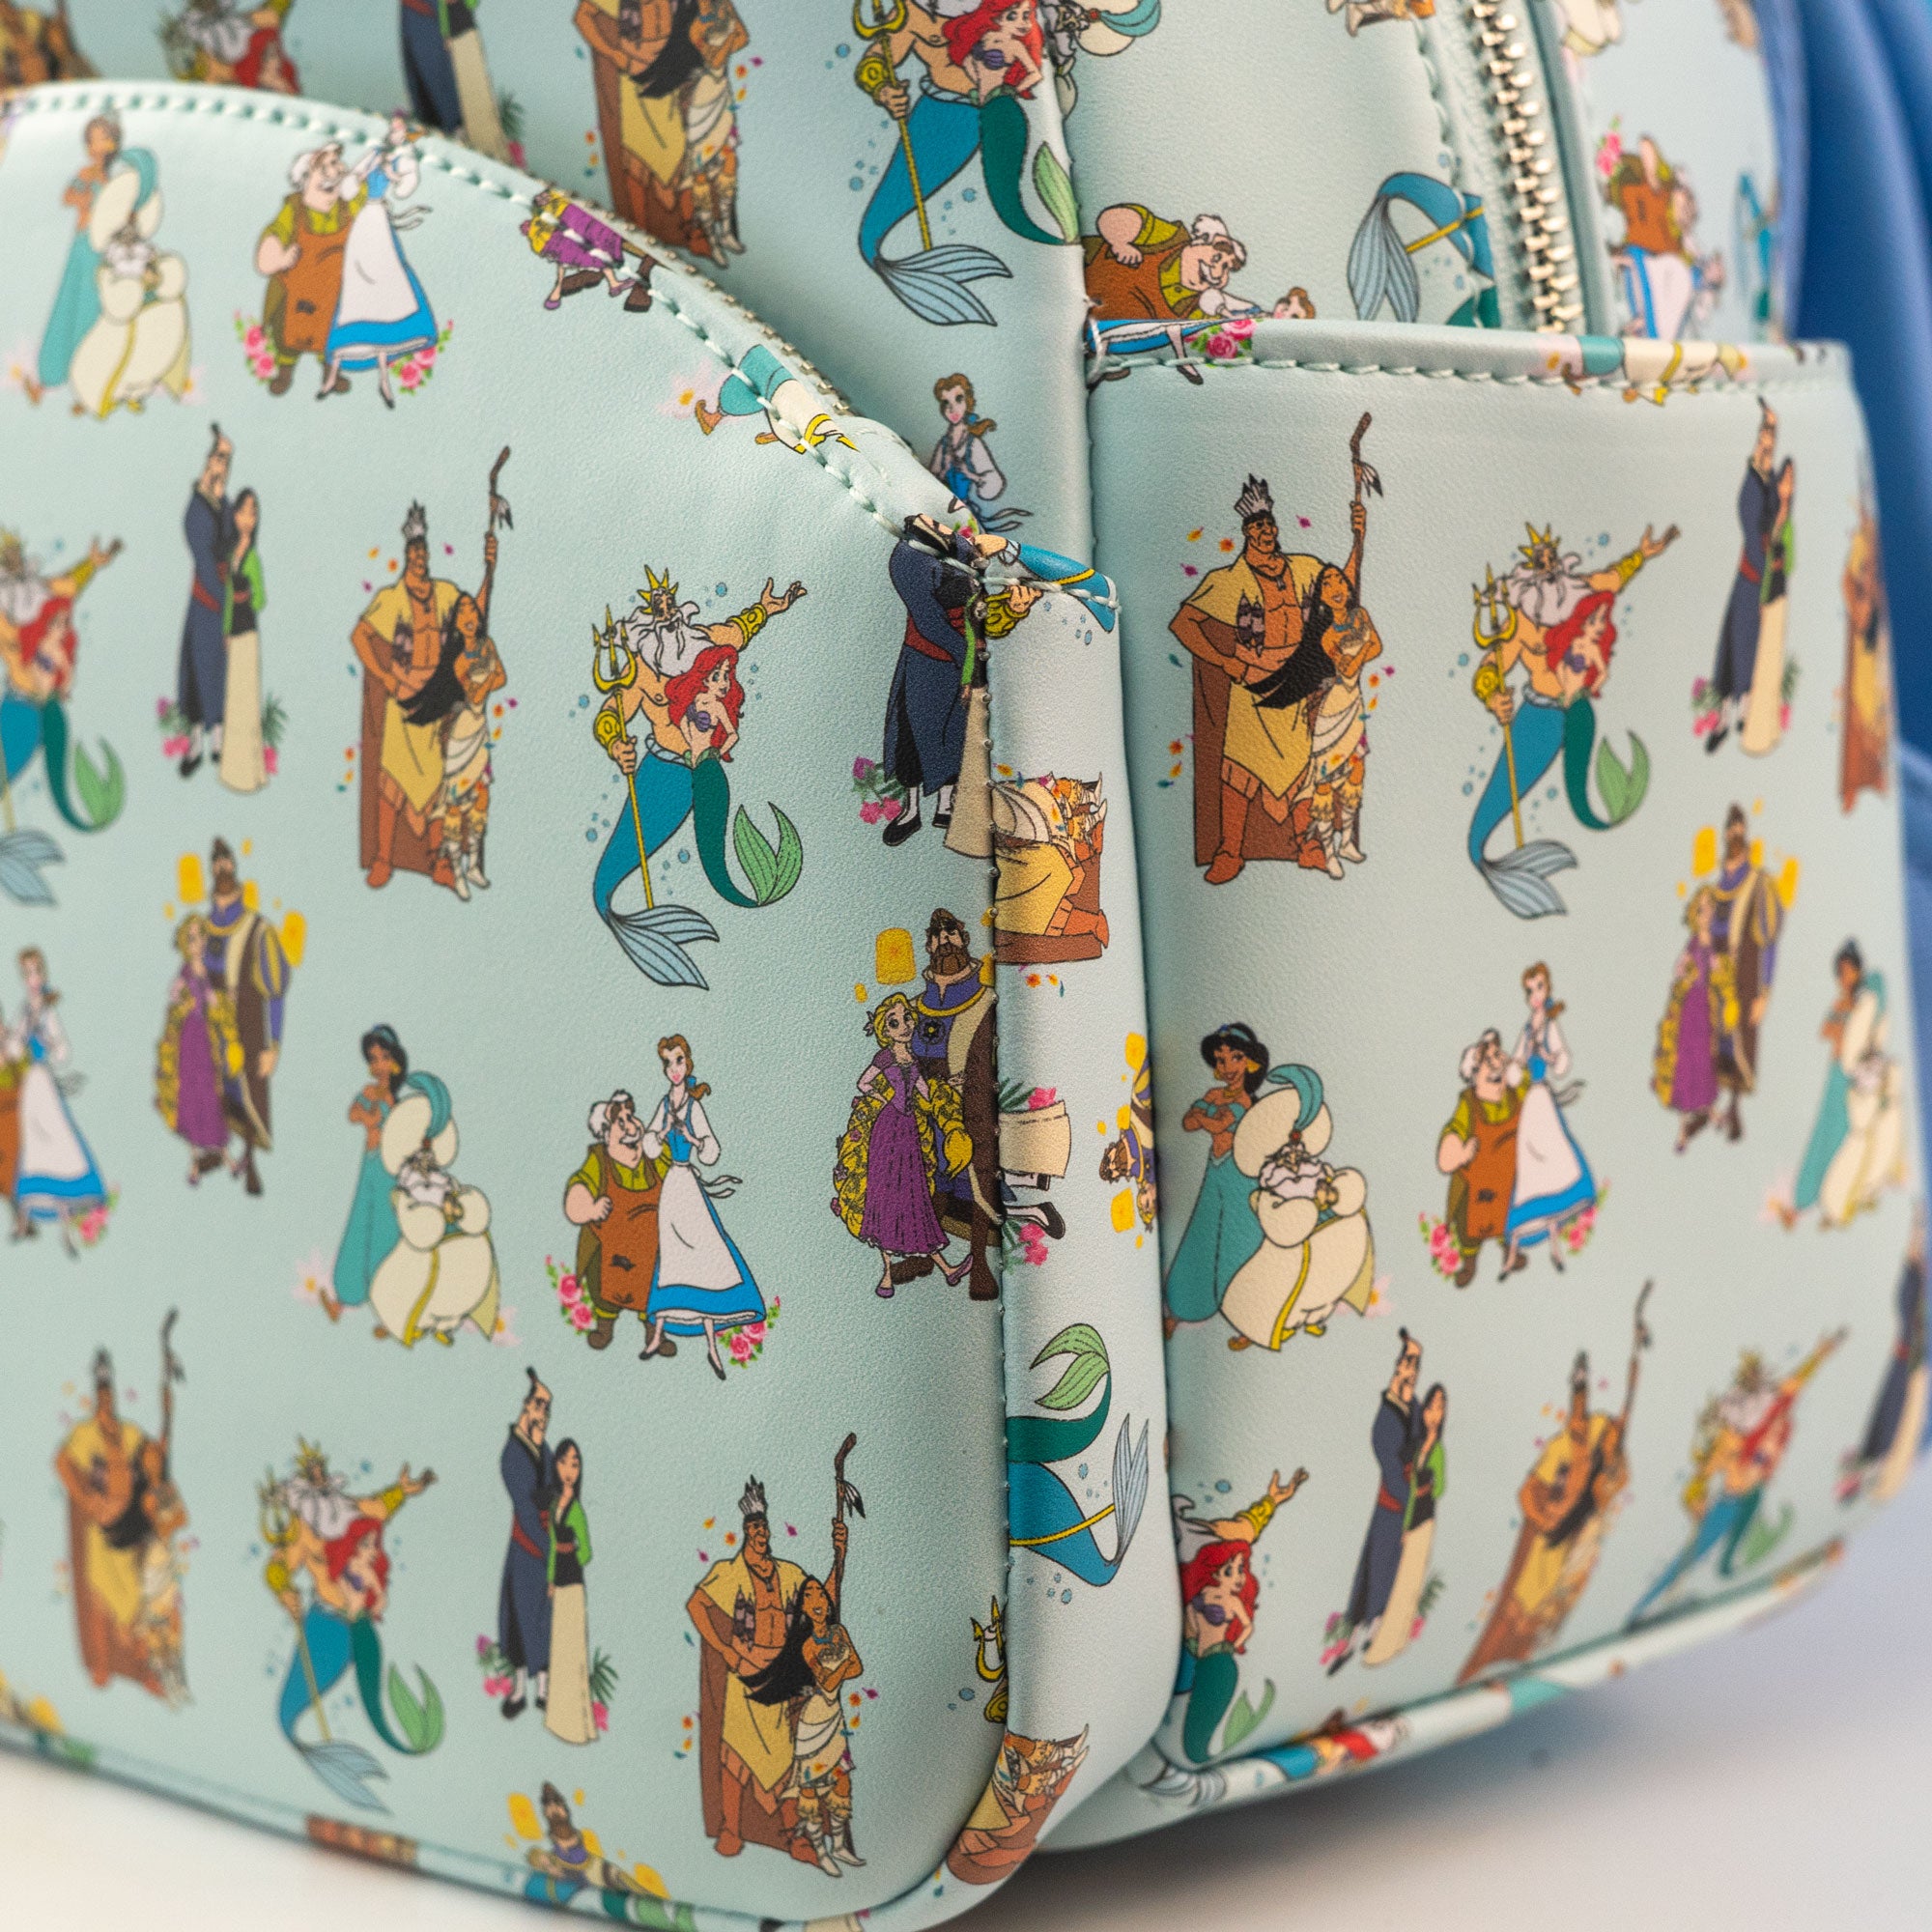 Loungefly x Disney Princesses with Fathers Mini Backpack